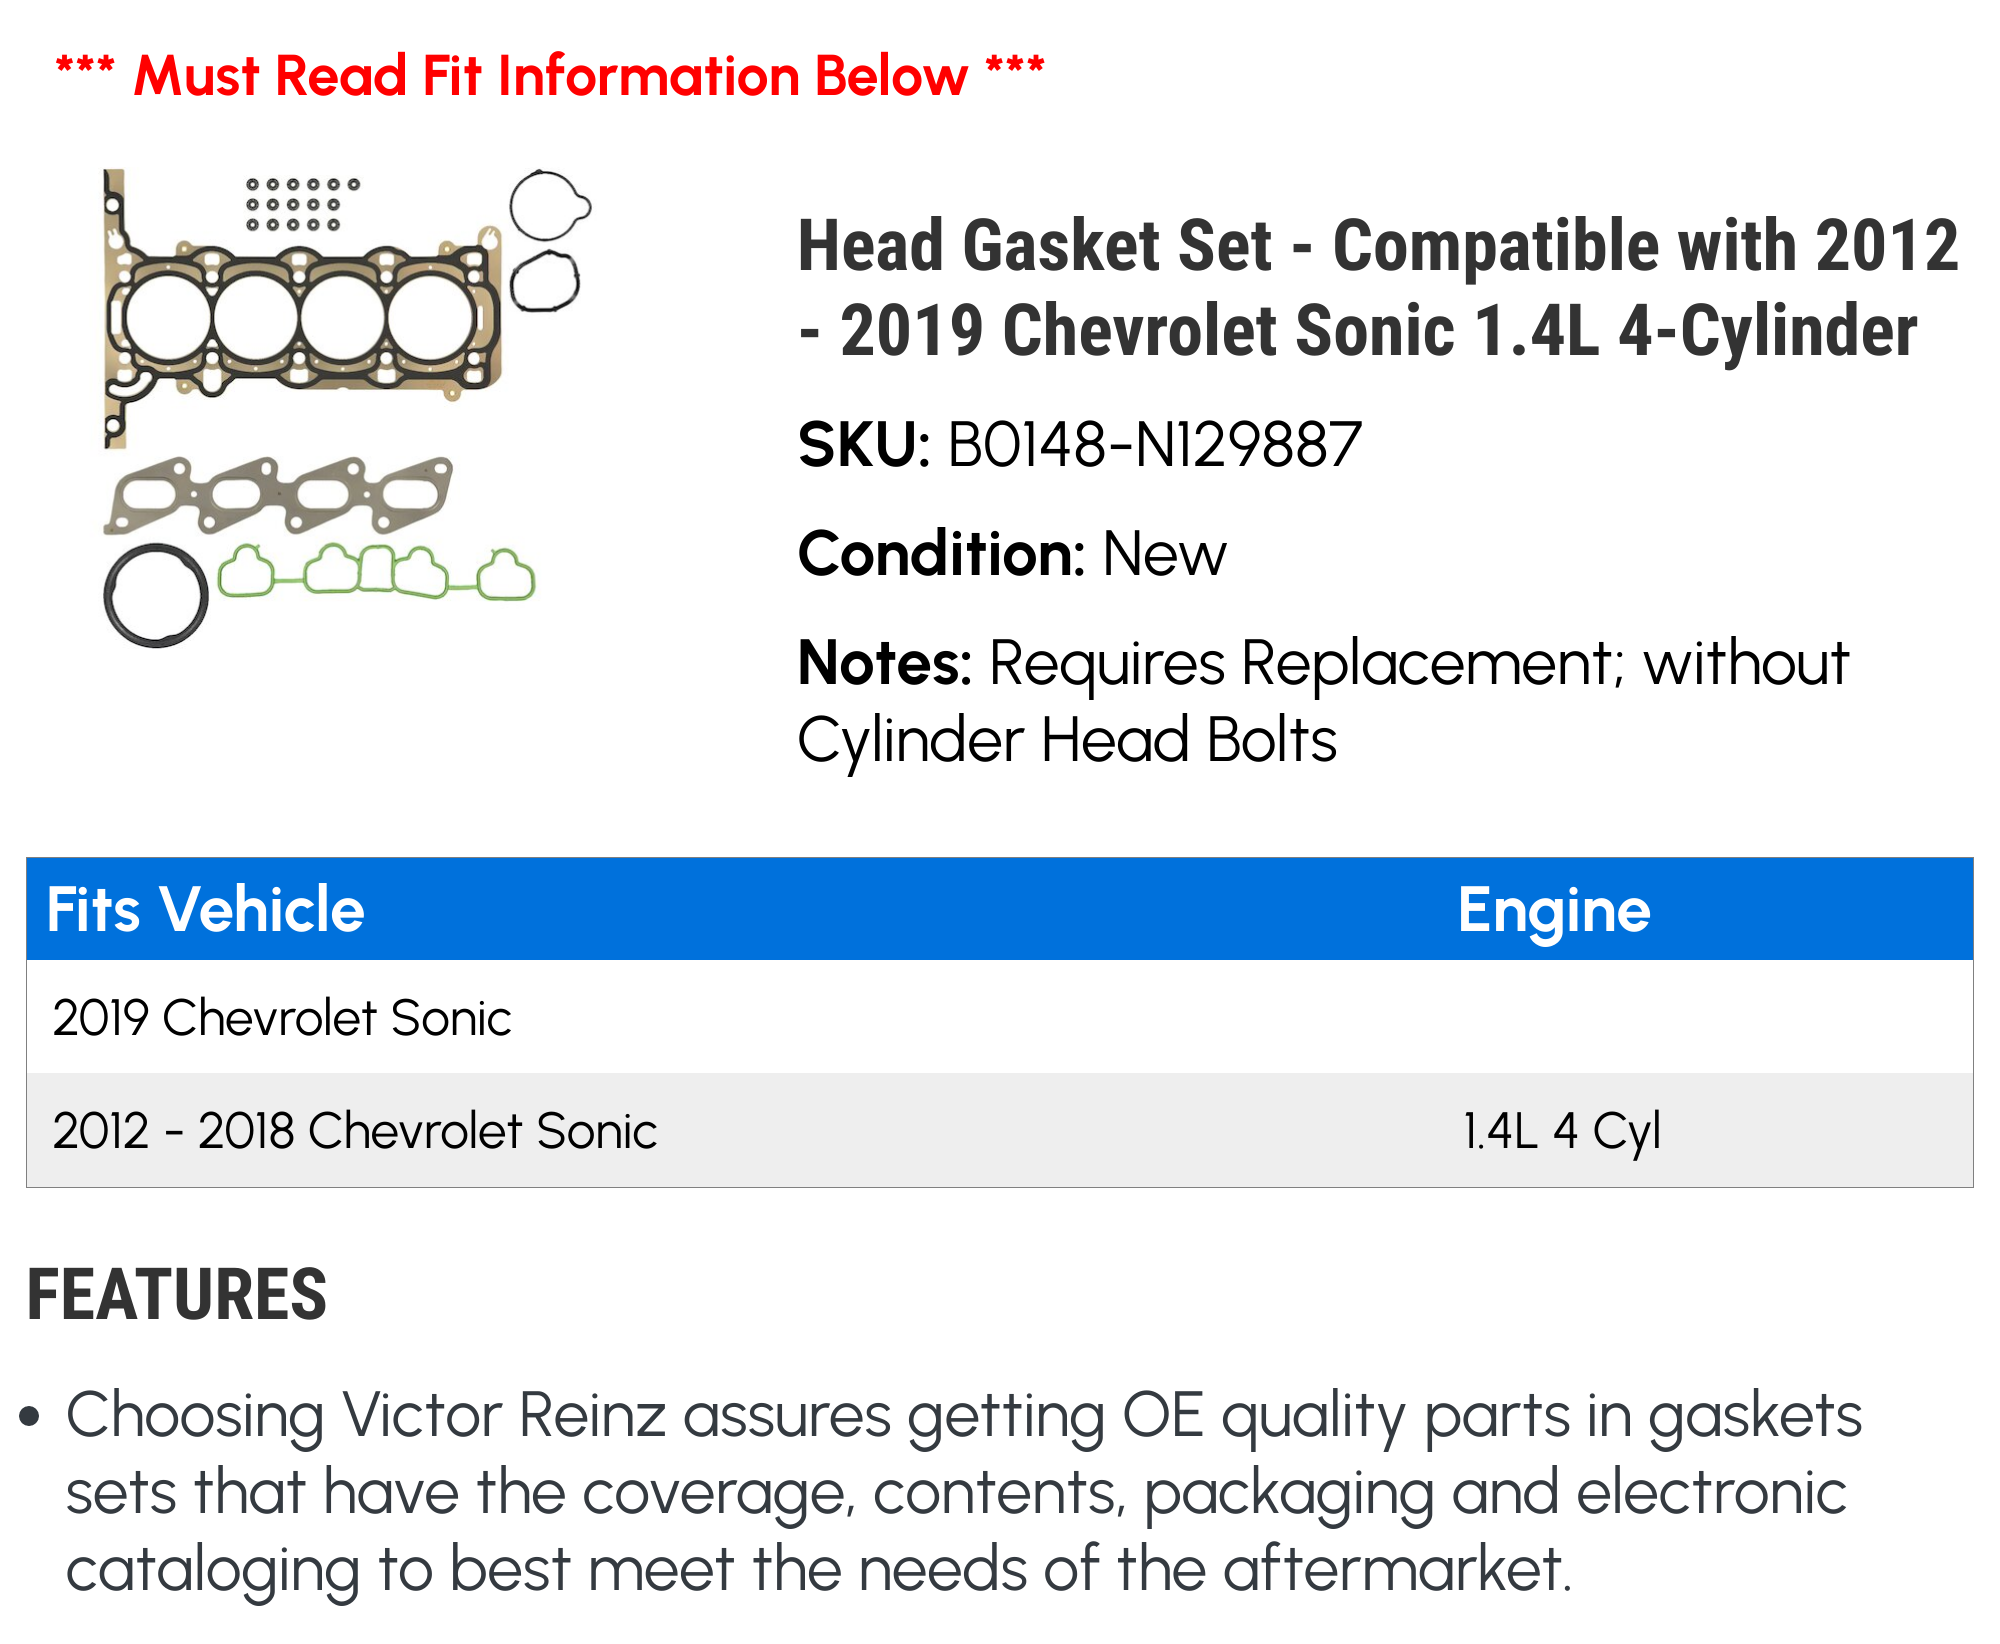 Set Head Gasket Sets Compatible with Chevy Chevrolet Cruze Sonic 2012-2013 - 2